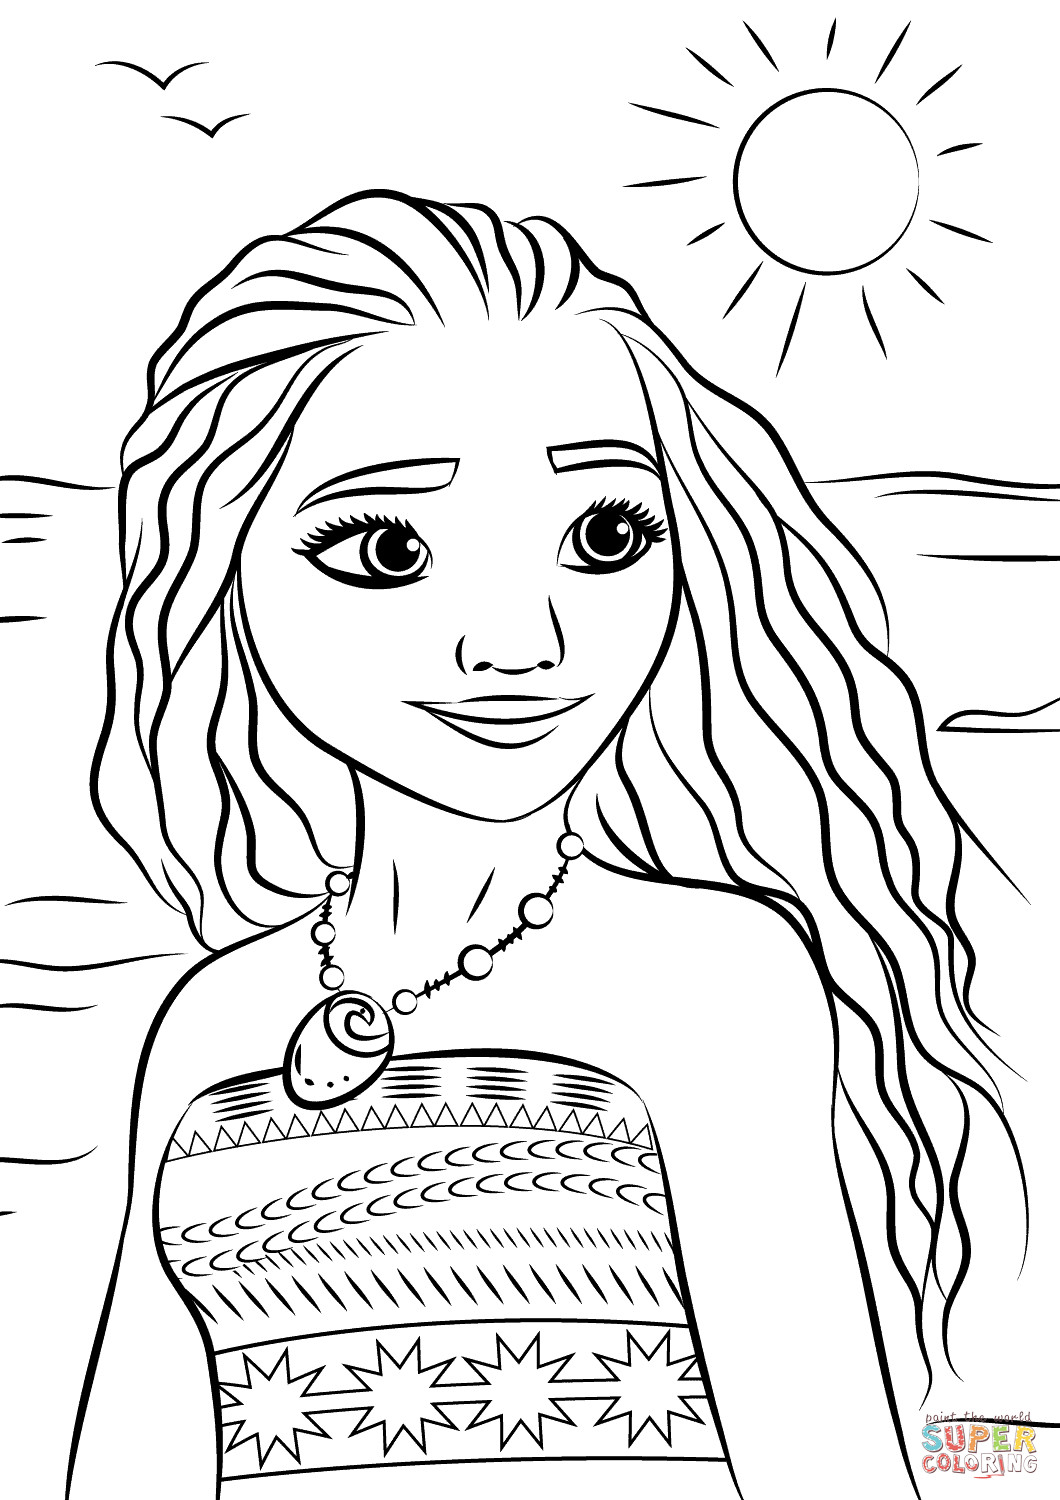 Moana Coloring Pages For Toddlers
 Princess Moana Portrait coloring page